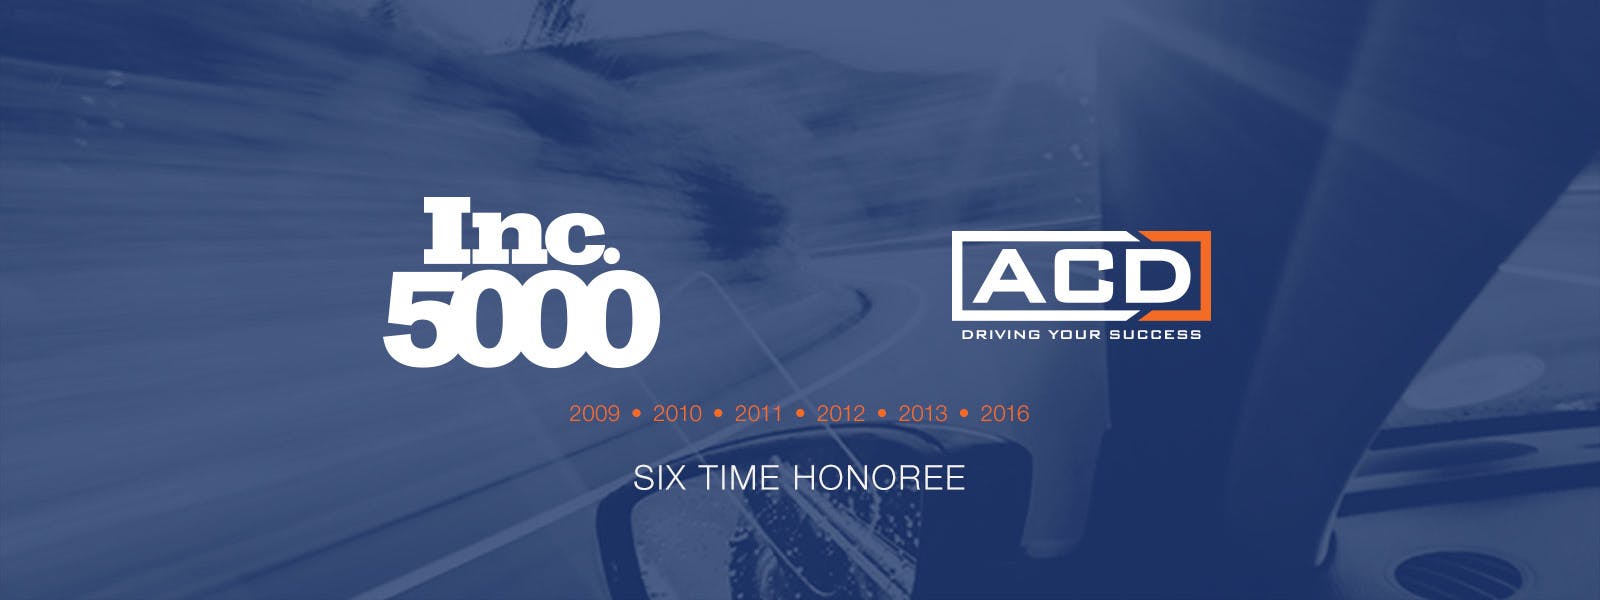 ACD named to exclusive Inc. 5000 list for the sixth time